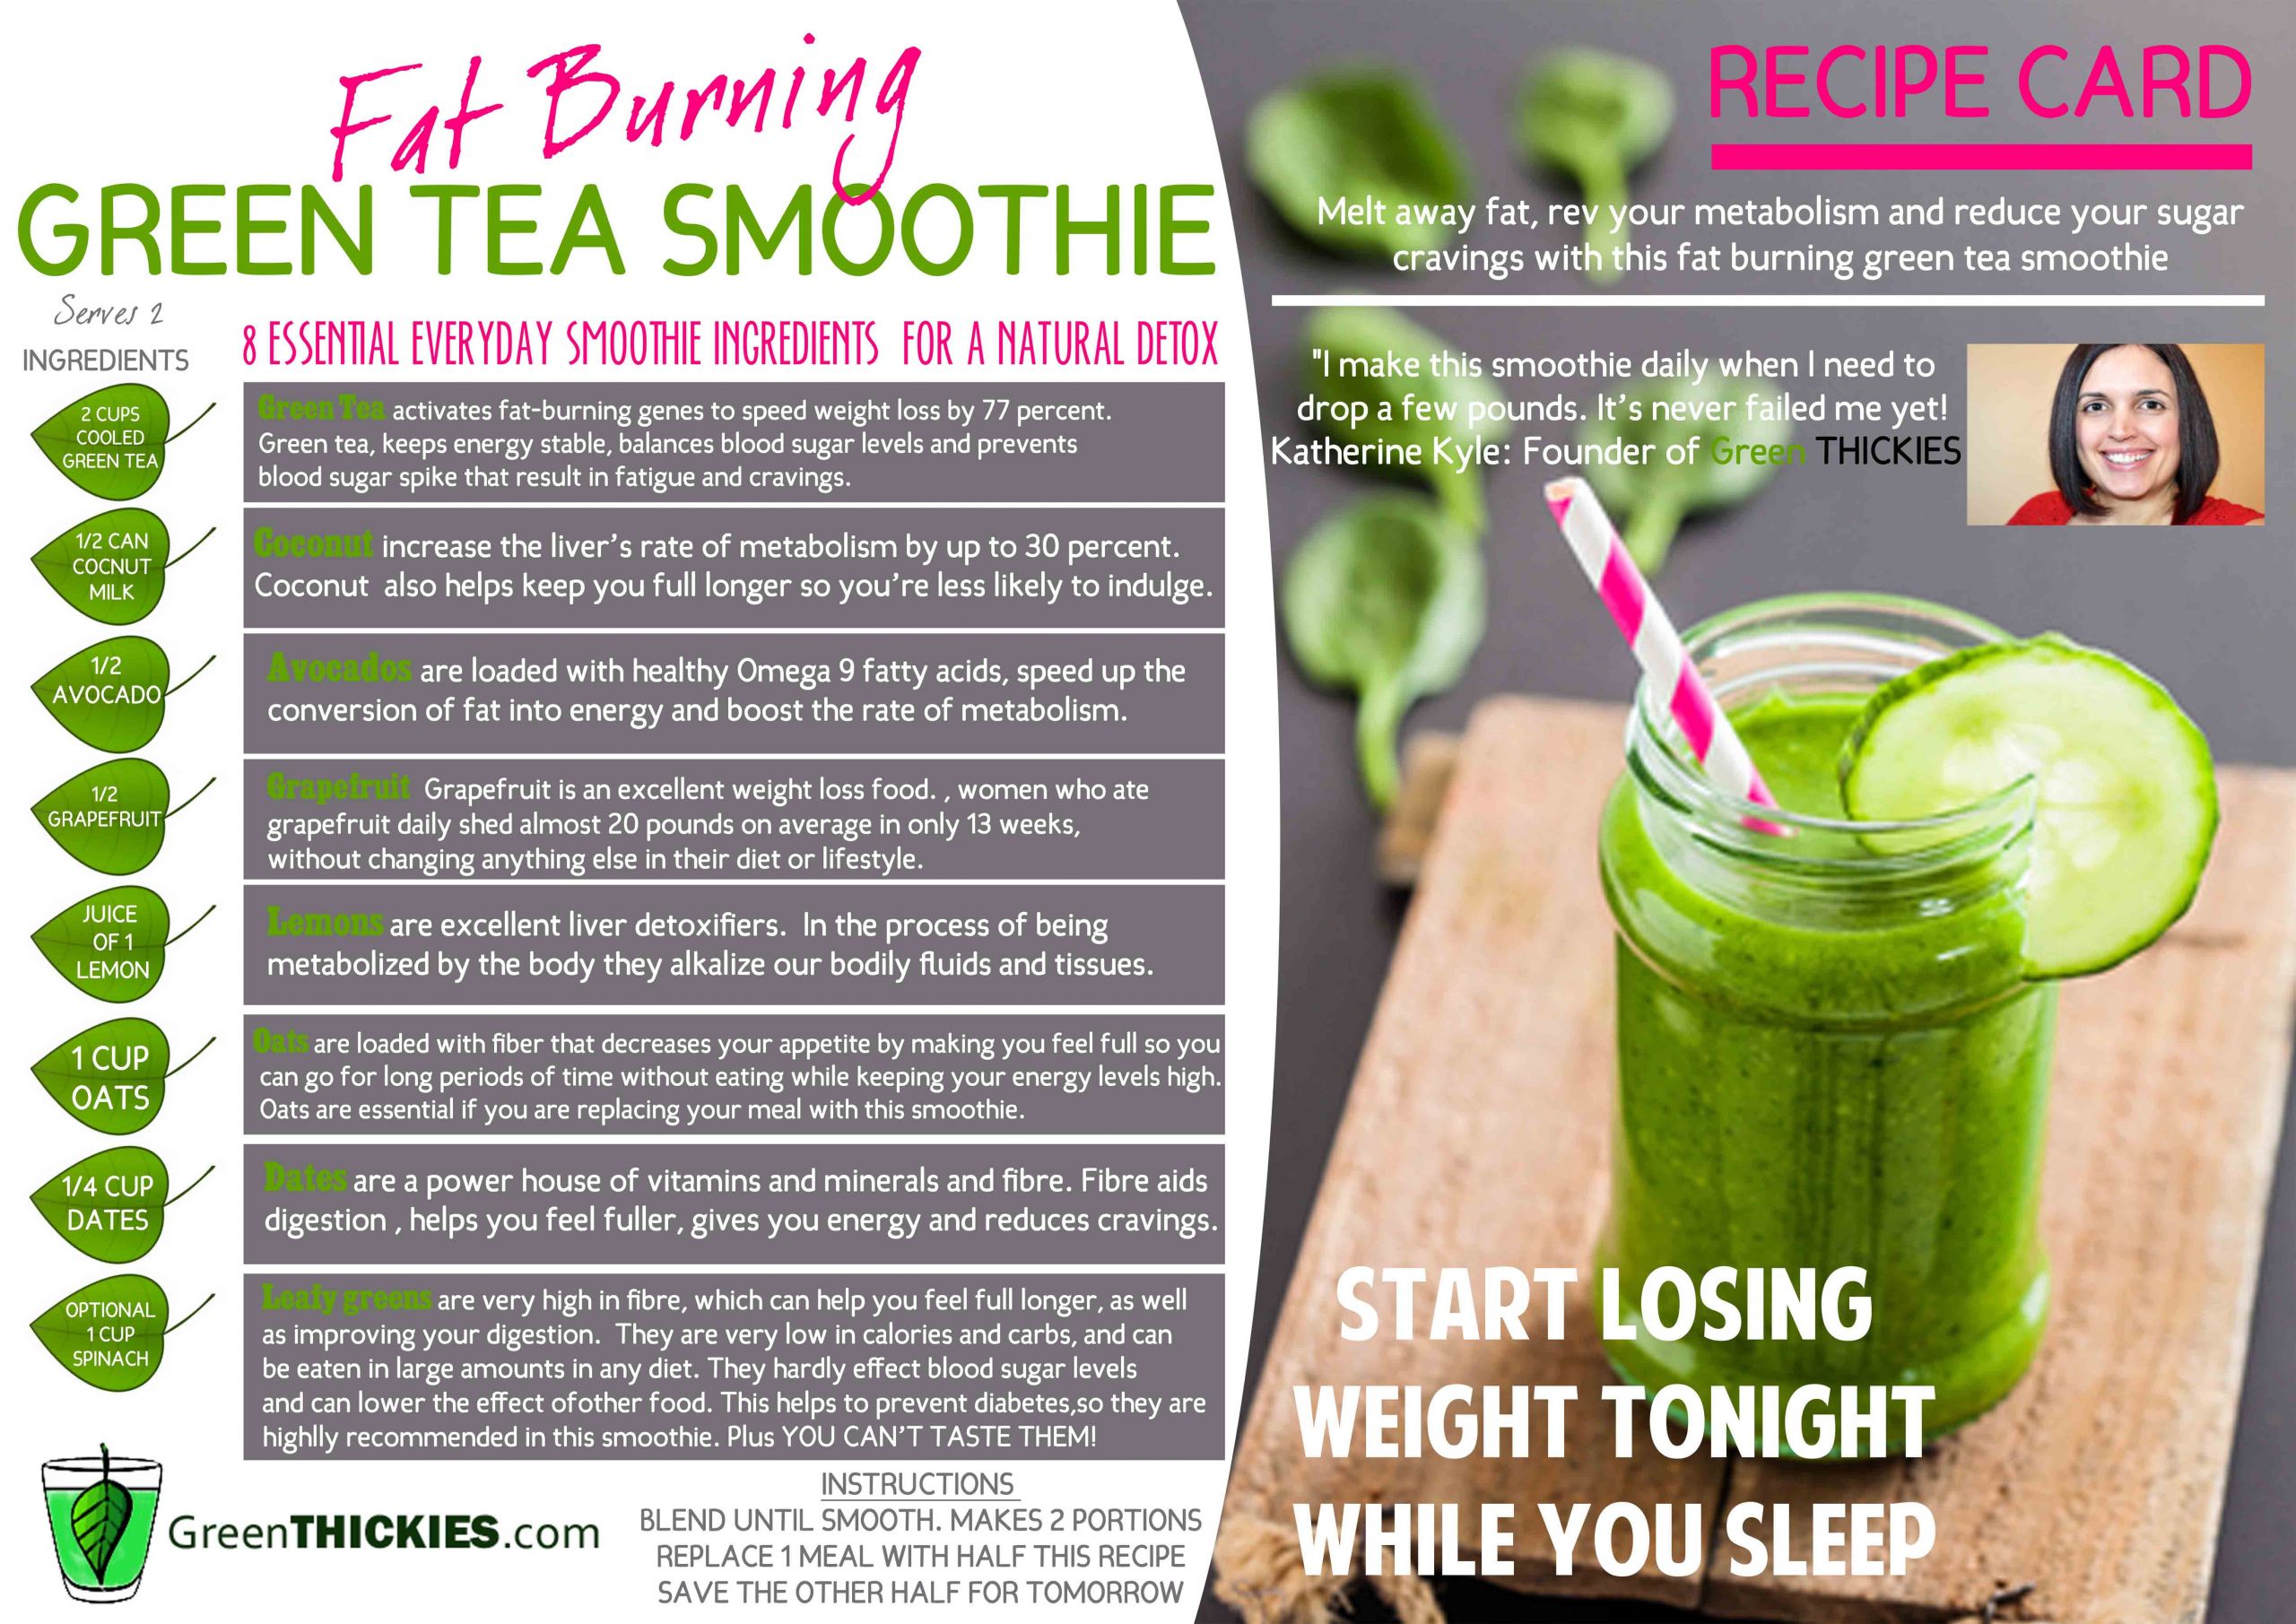 Green Smoothie Recipes For Weight Loss
 How I lost 56 Pounds with the Green Smoothie Diet and